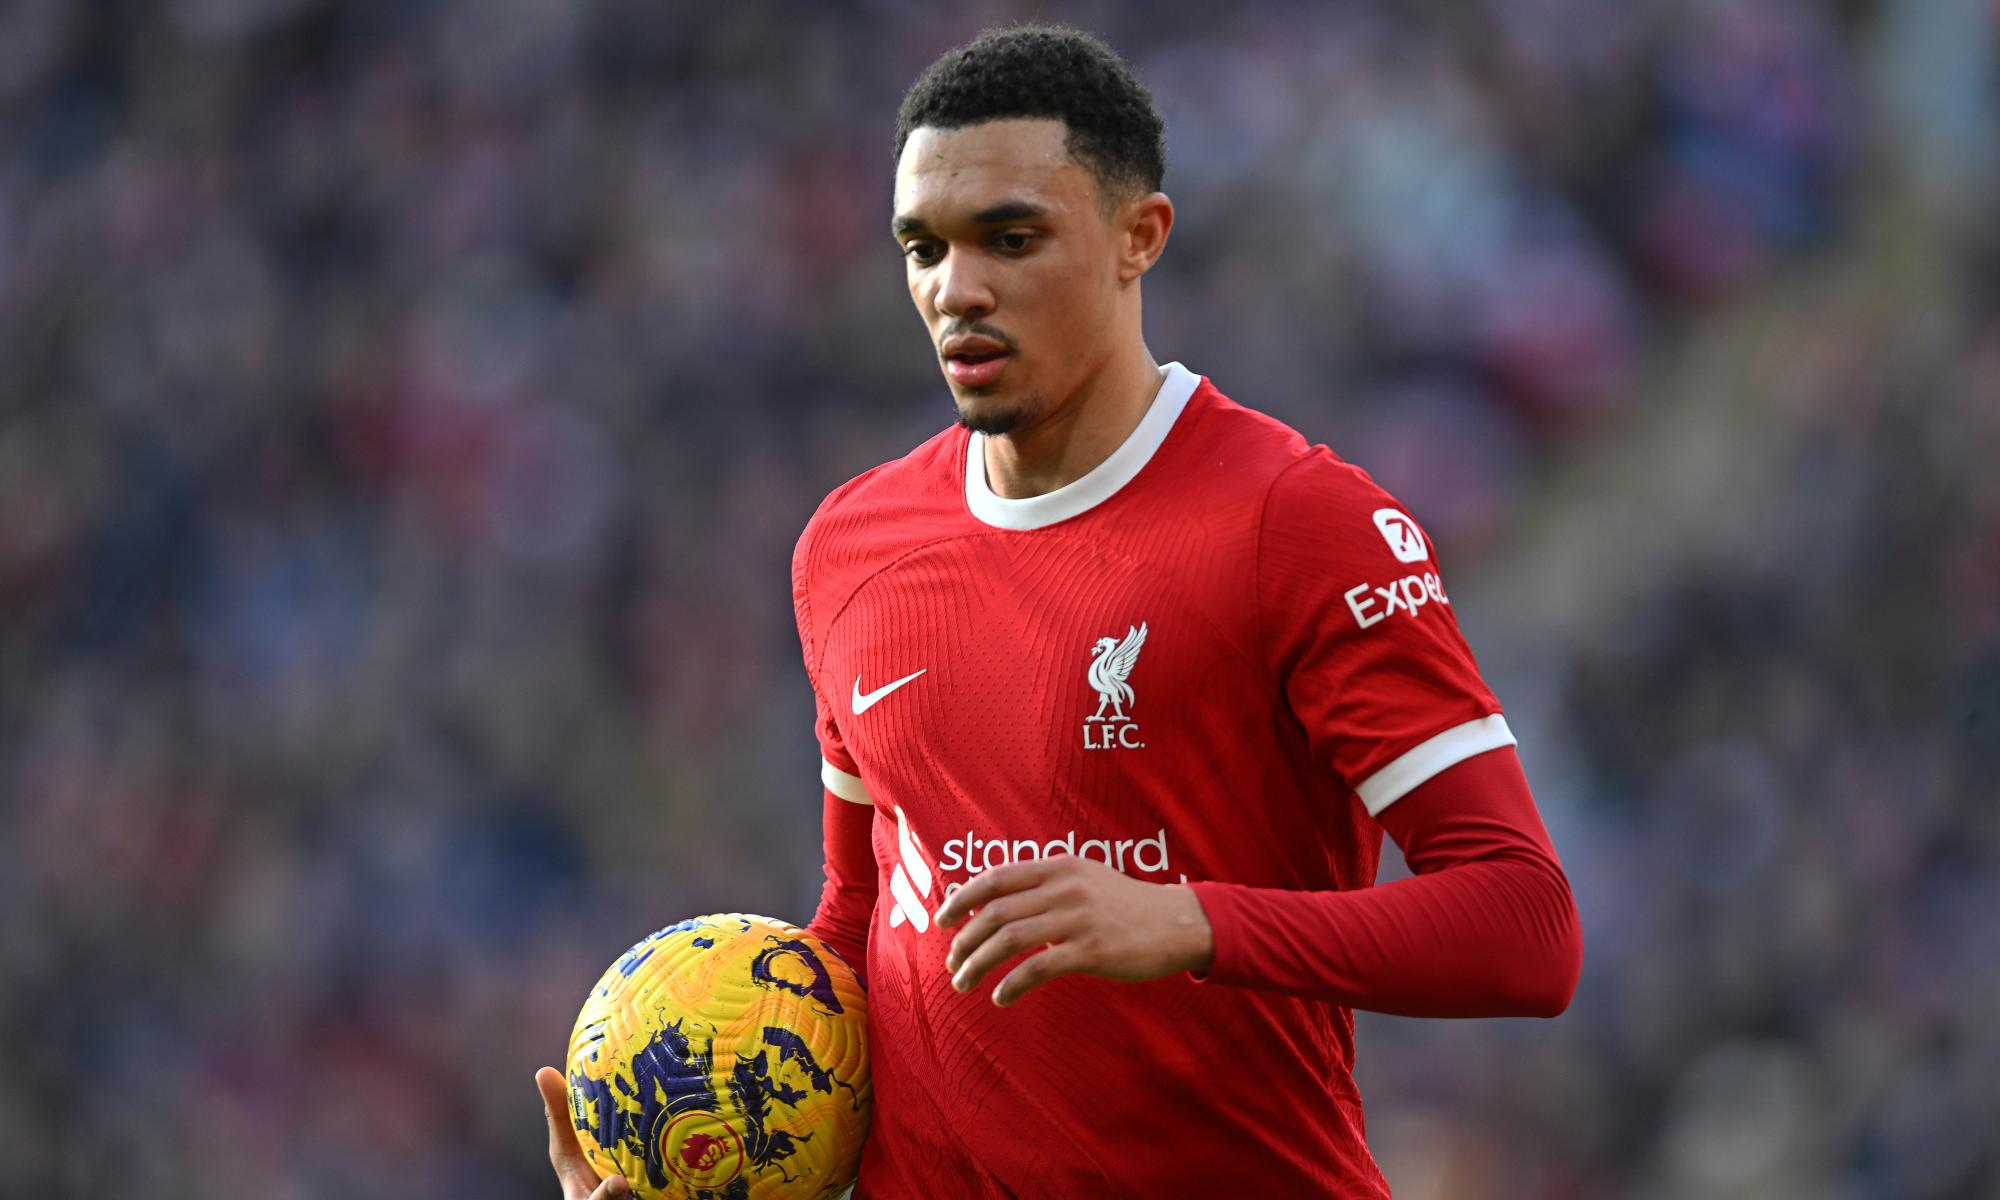 trent alexander-arnold to miss carabao cup final for liverpool due to injury